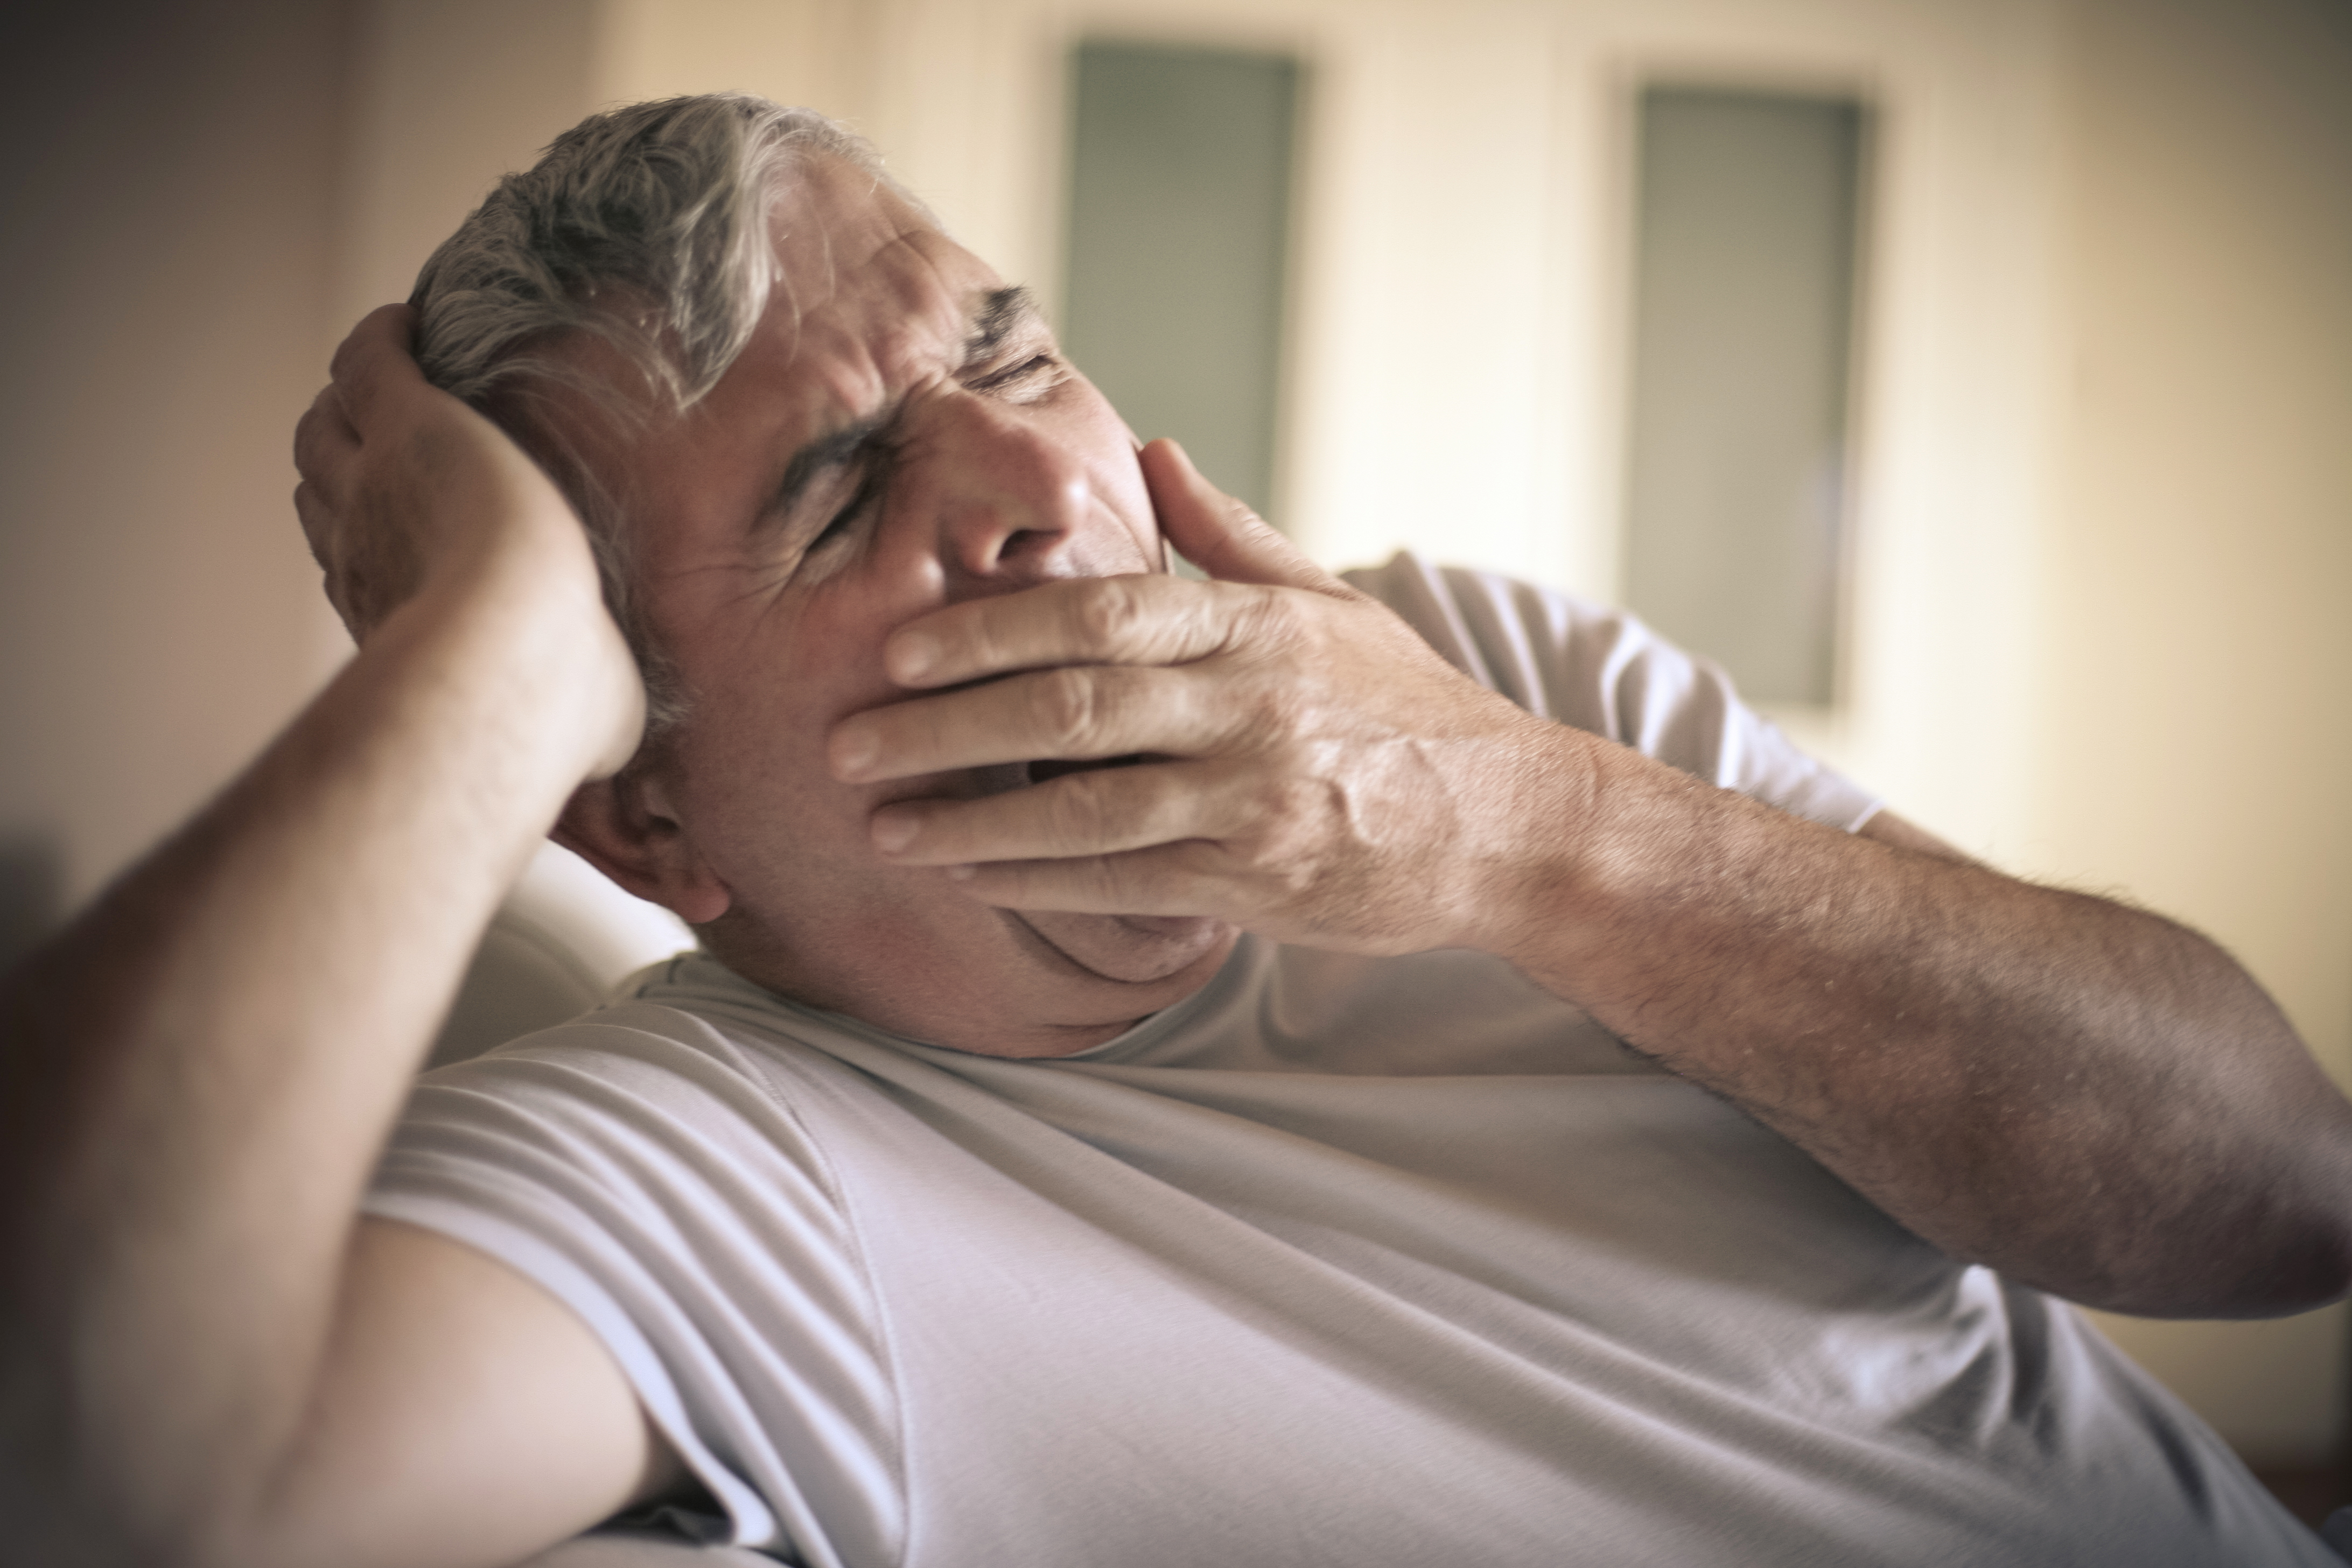 An older man in a light-colored t-shirt lets out a big yawn as he covers his mouth with his left hand. His eyes are closed, and his head is resting on his right hand. 